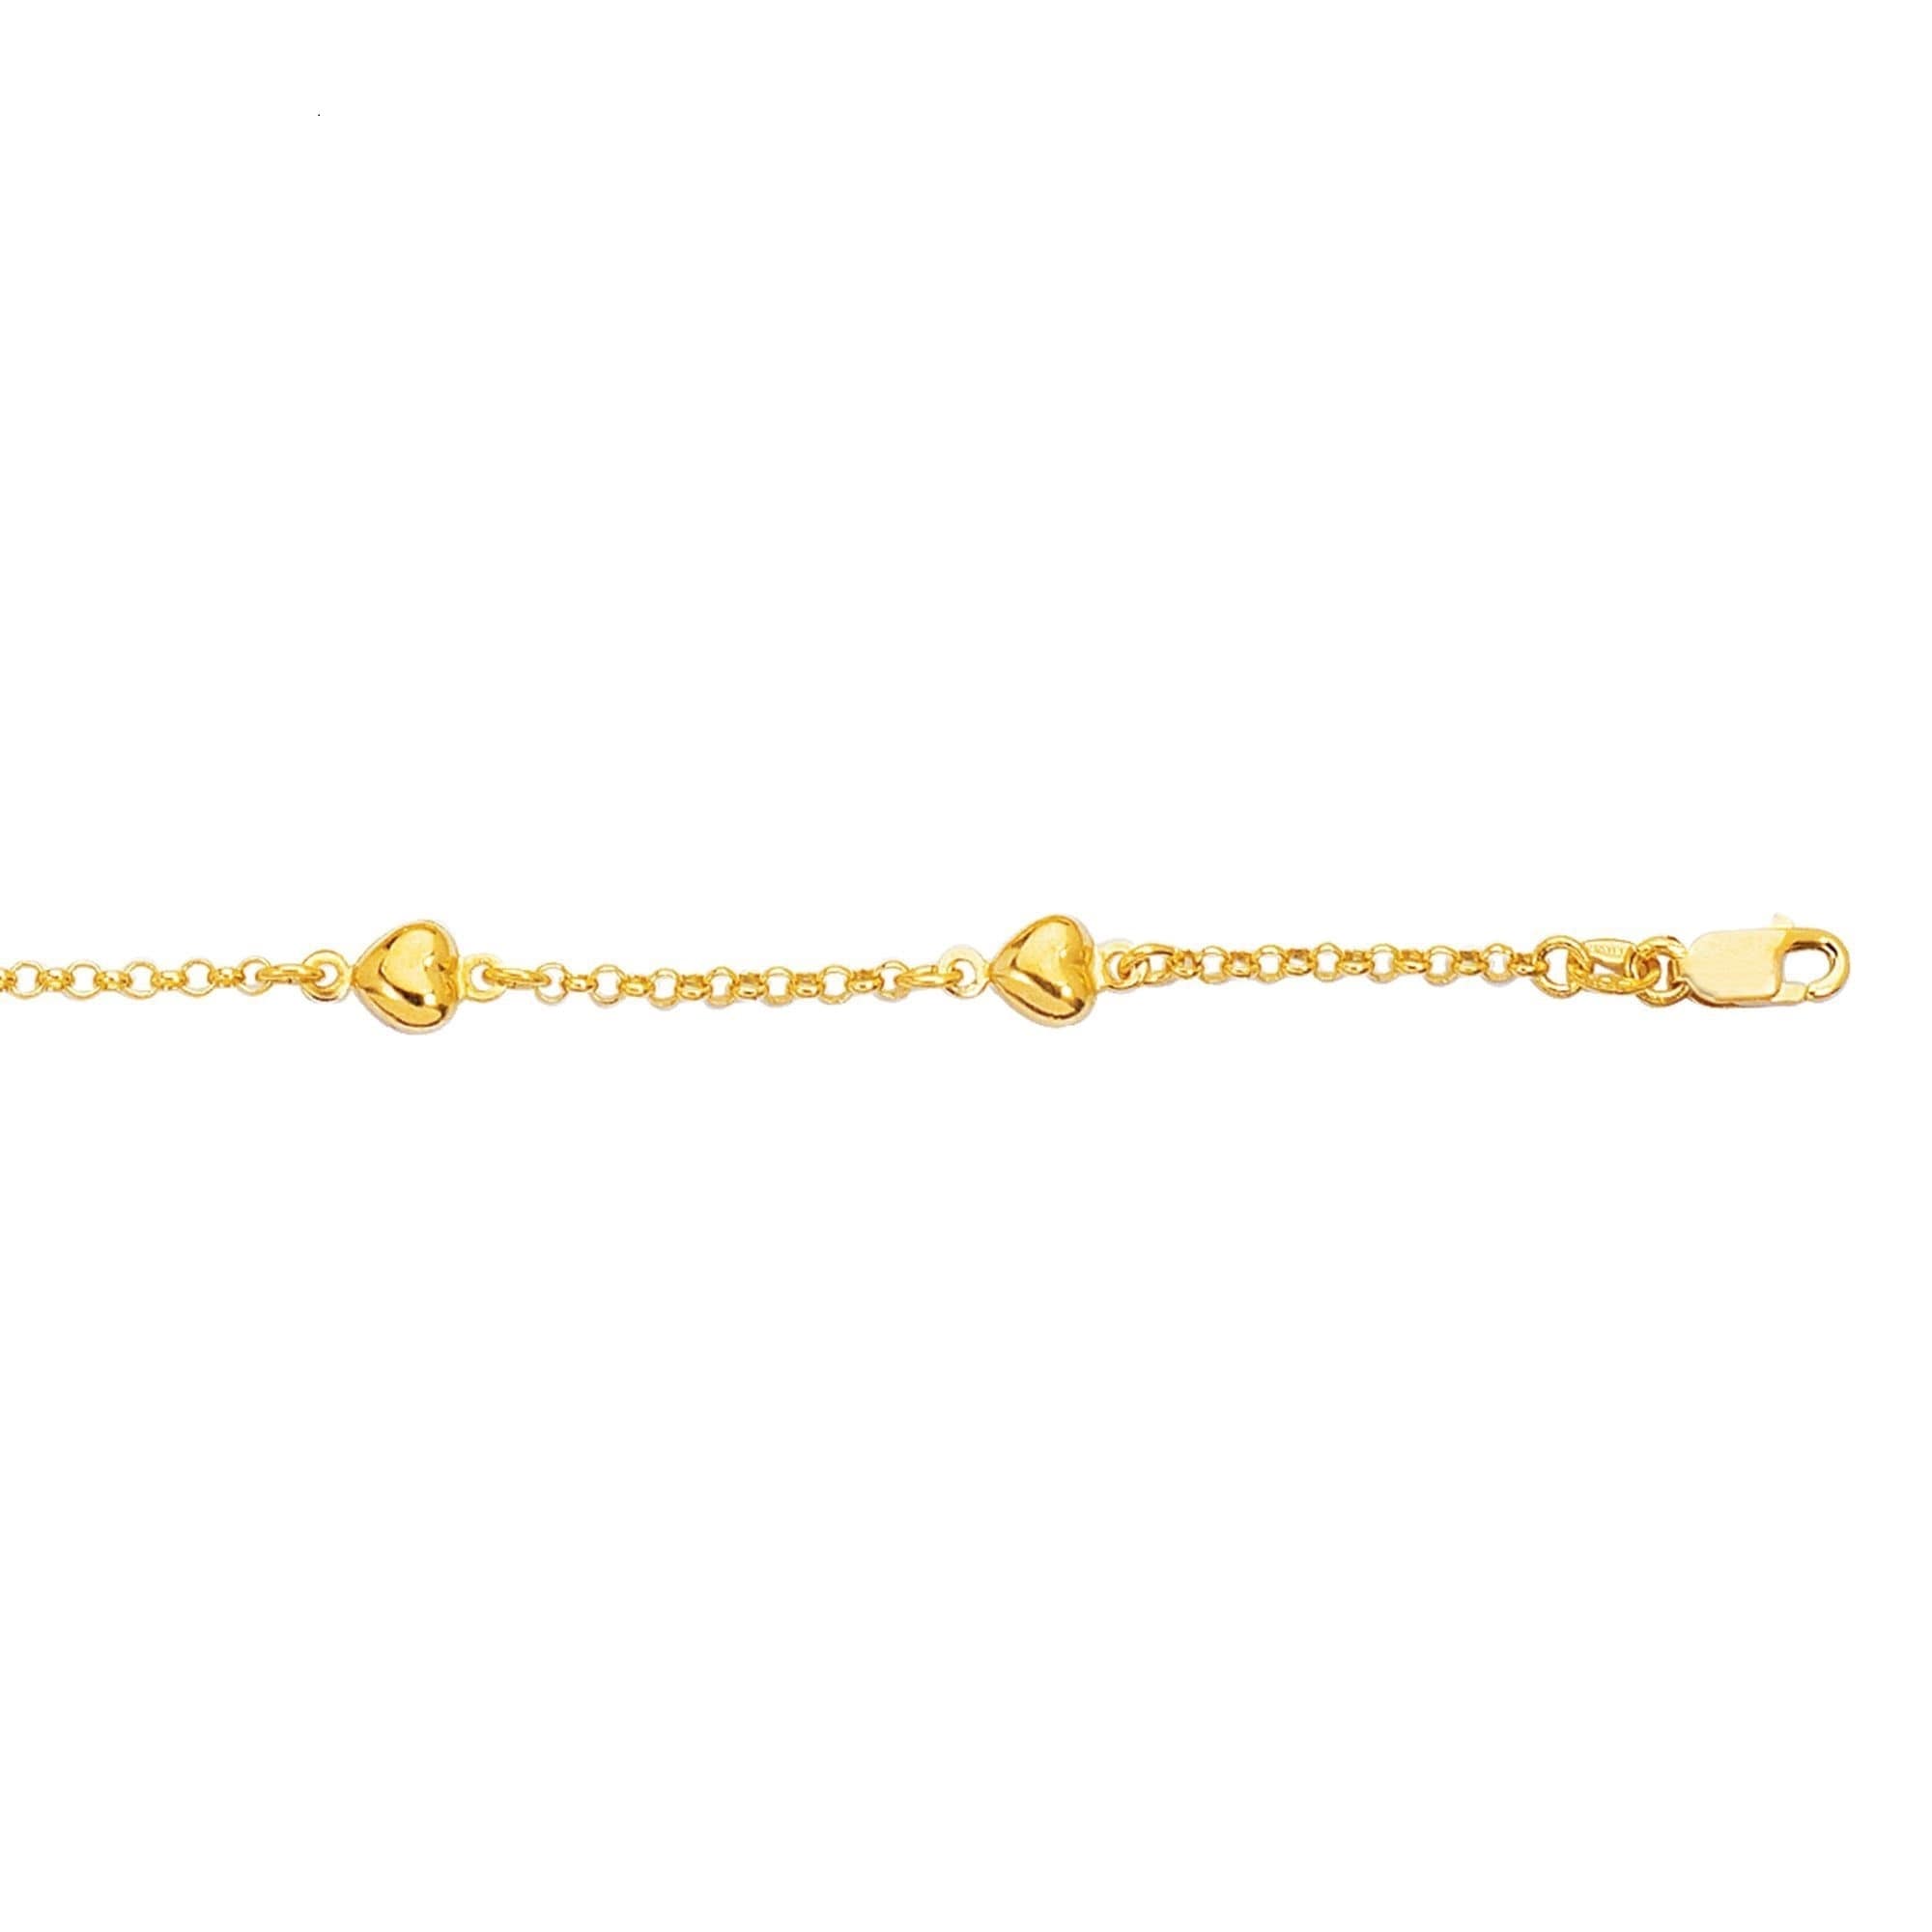 9ct Yellow Gold Figaro Chain Anklet10 Inch Ankle BraceletHallmarked